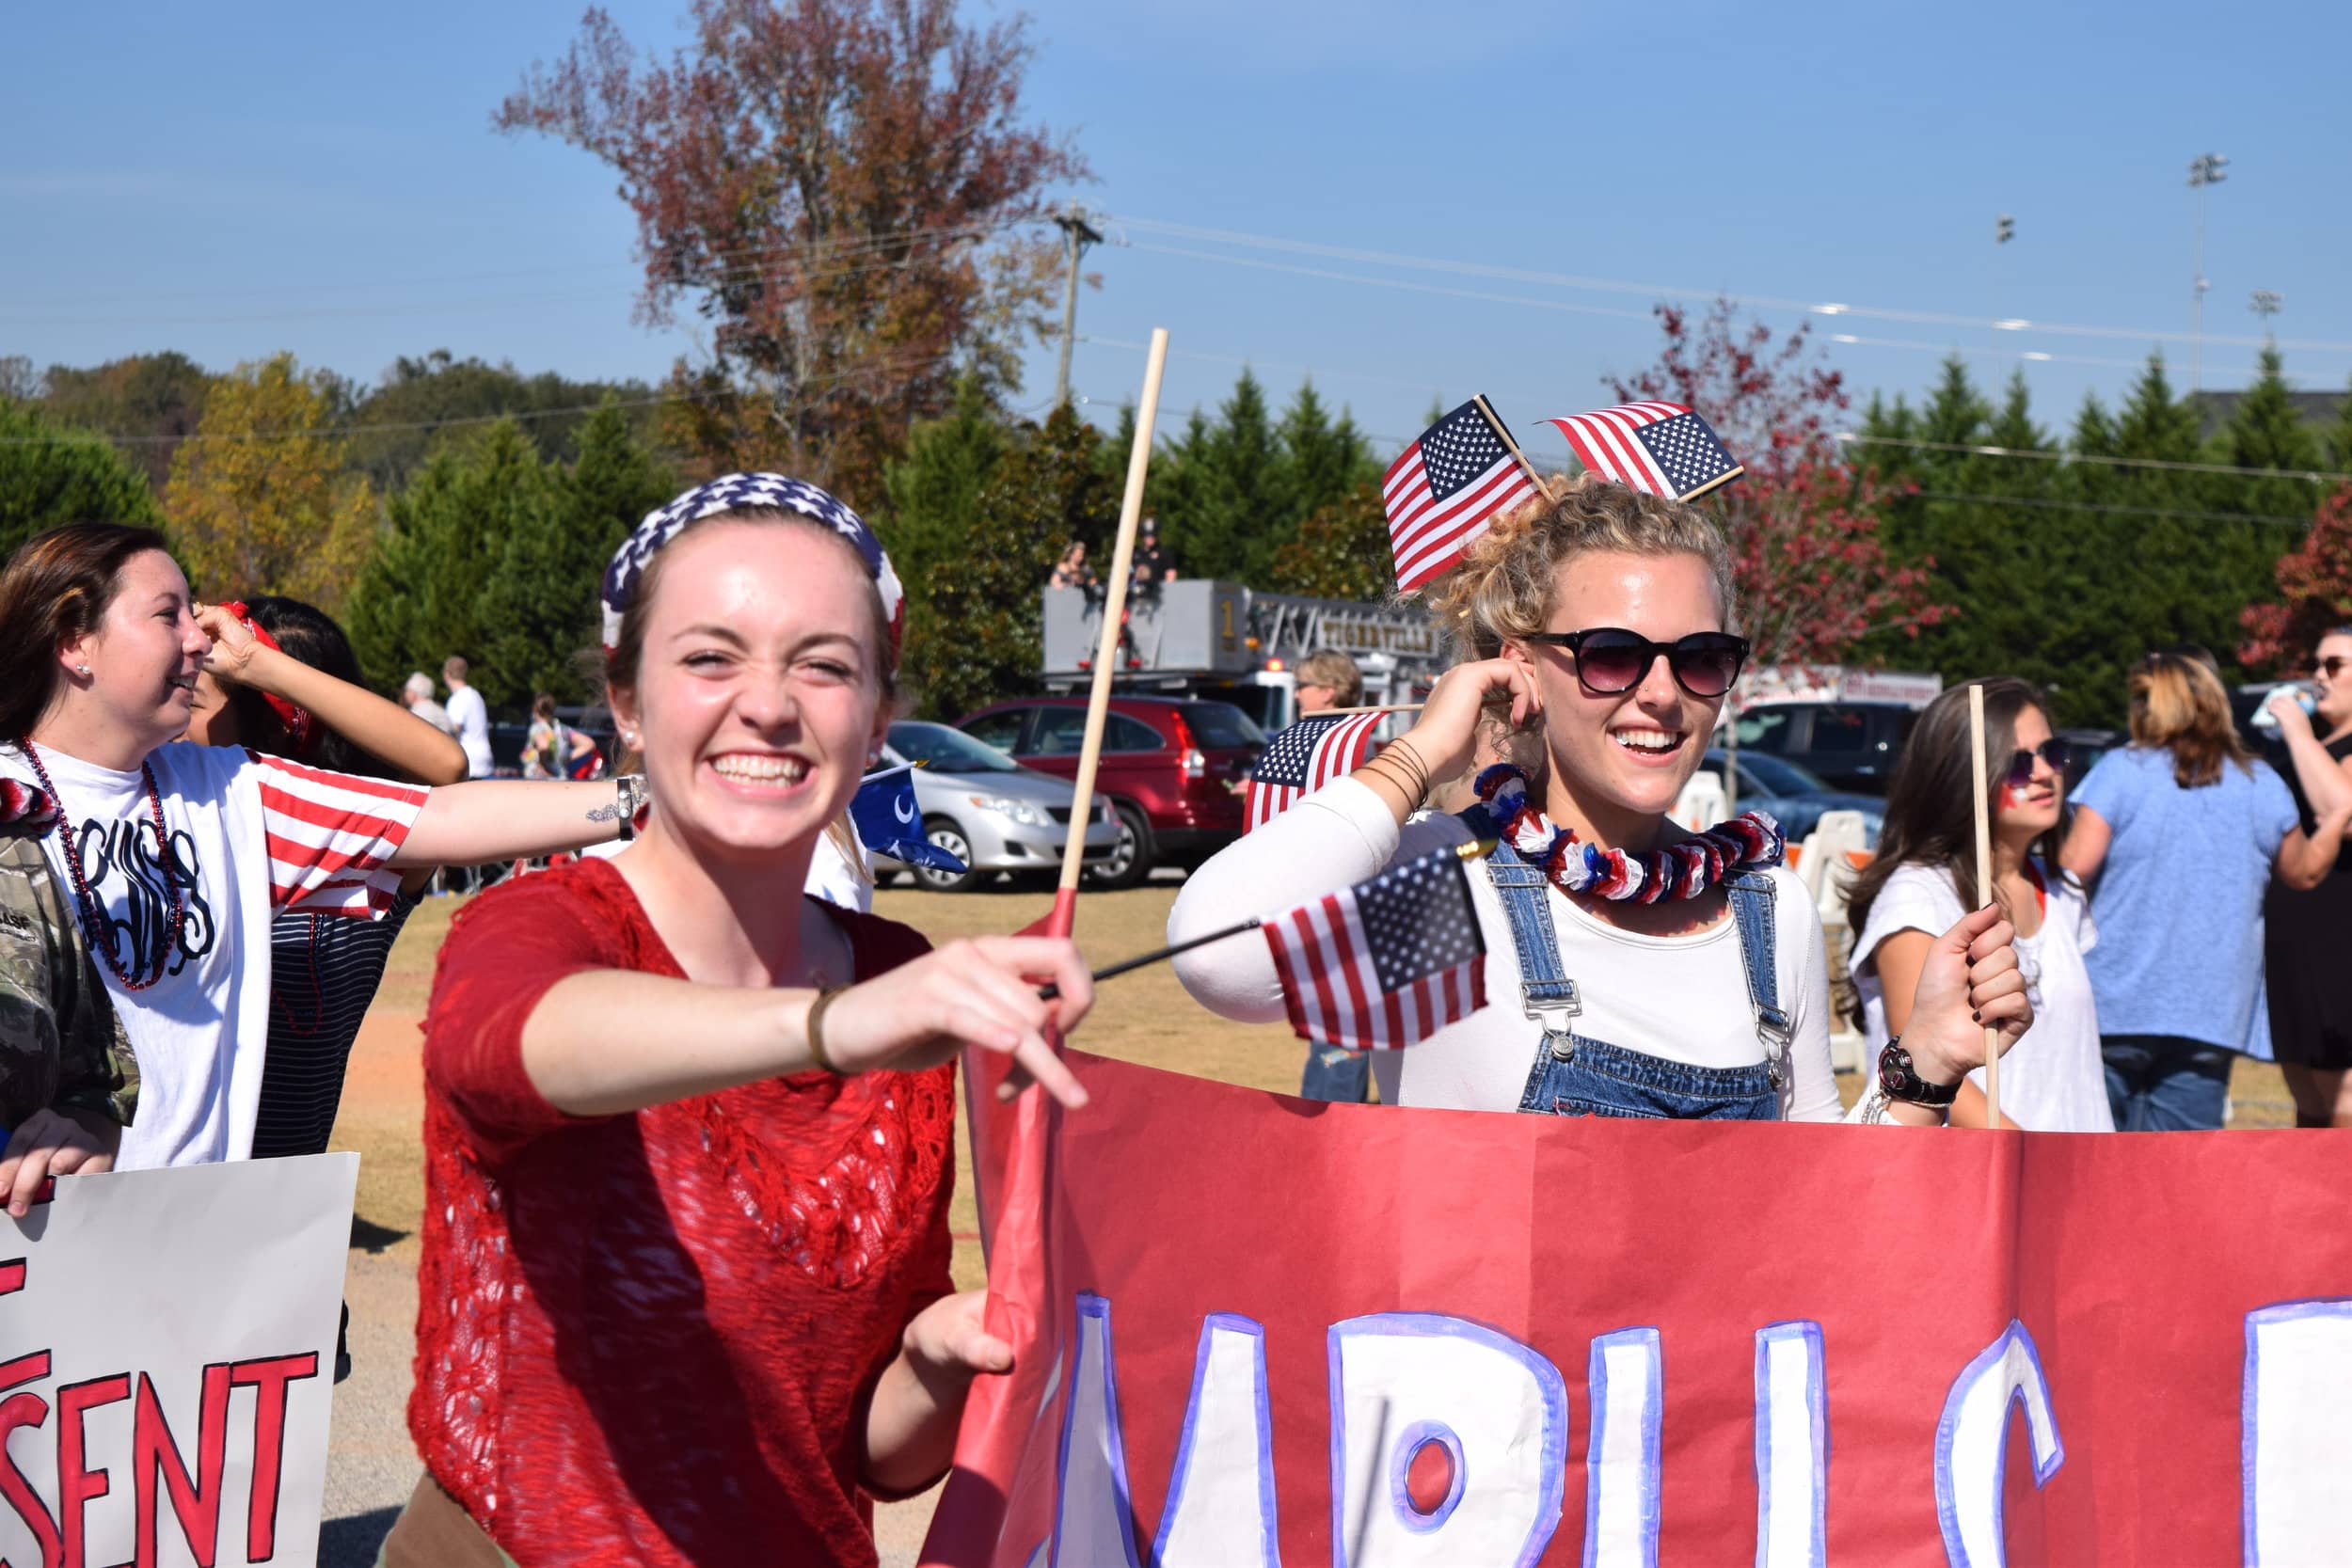 Caroline Kirkland and Hannah Reese show their patriotism as they walk in the parade.